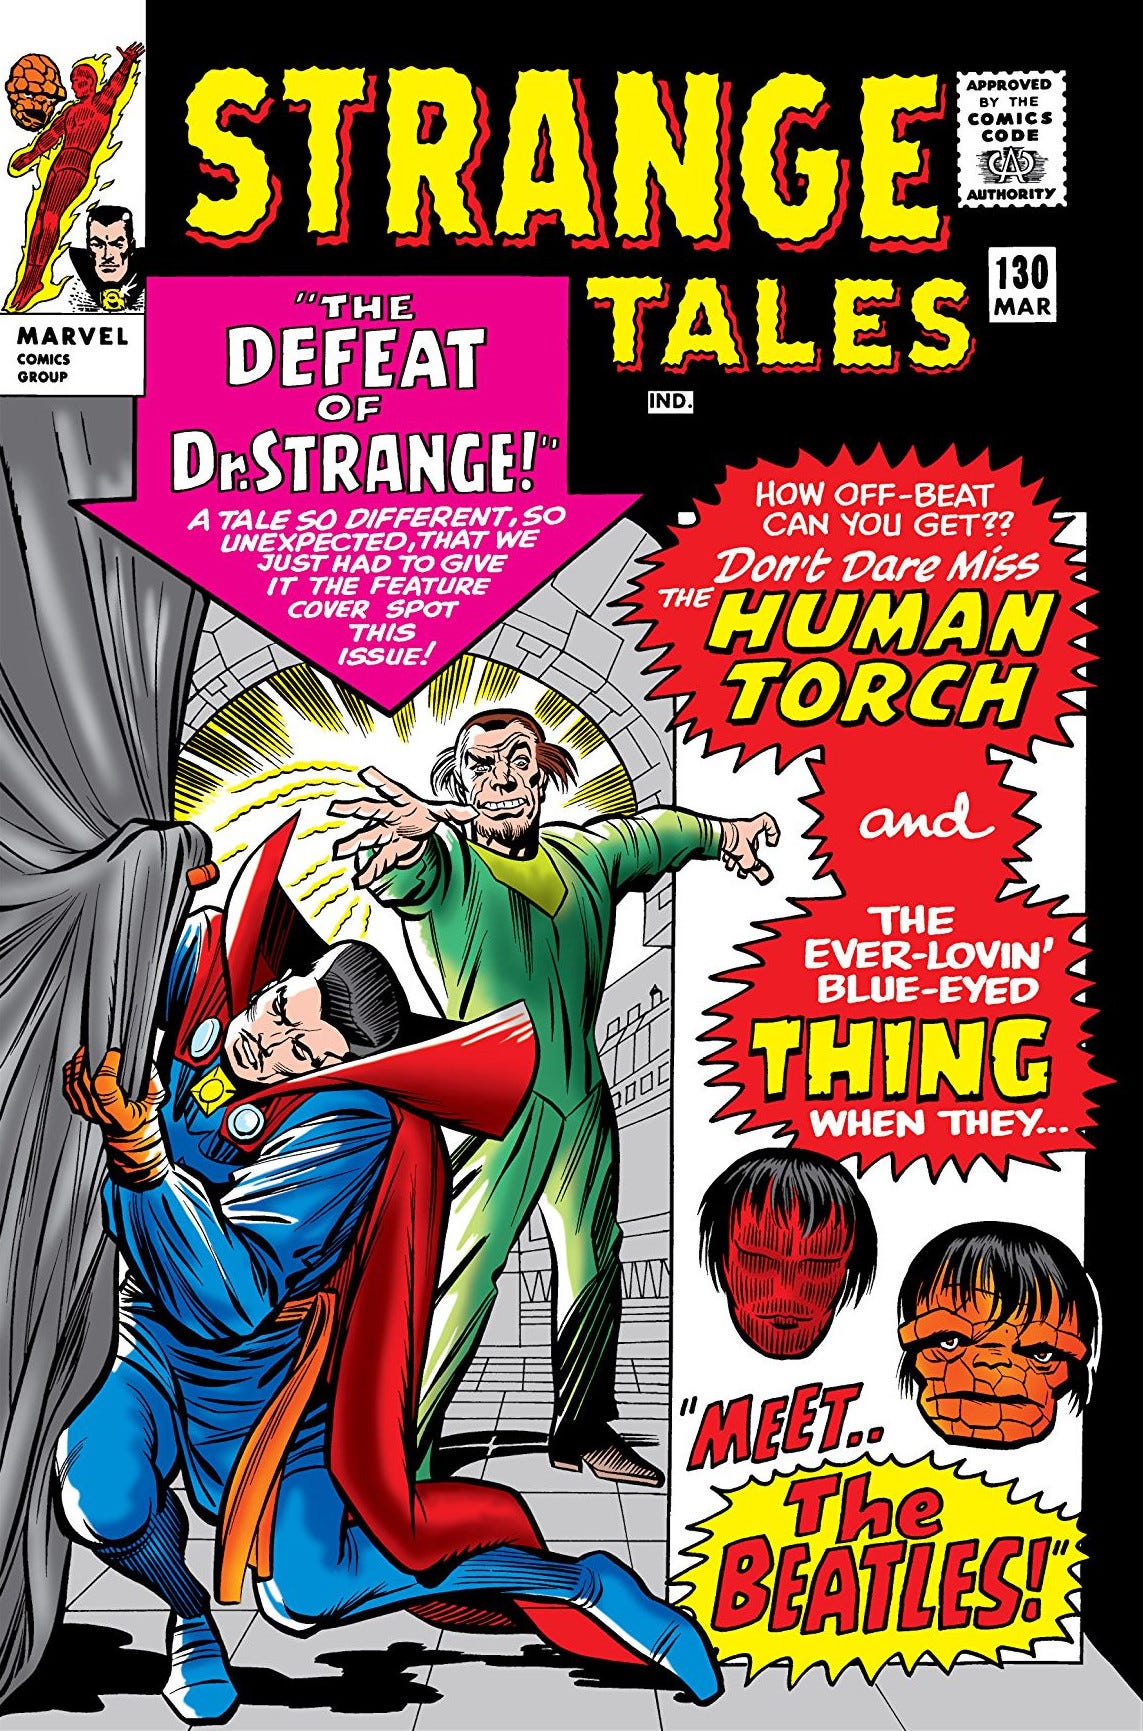 Episode 184: Not by the Charity of the Butcher (Strange Tales #130) -- March 1965